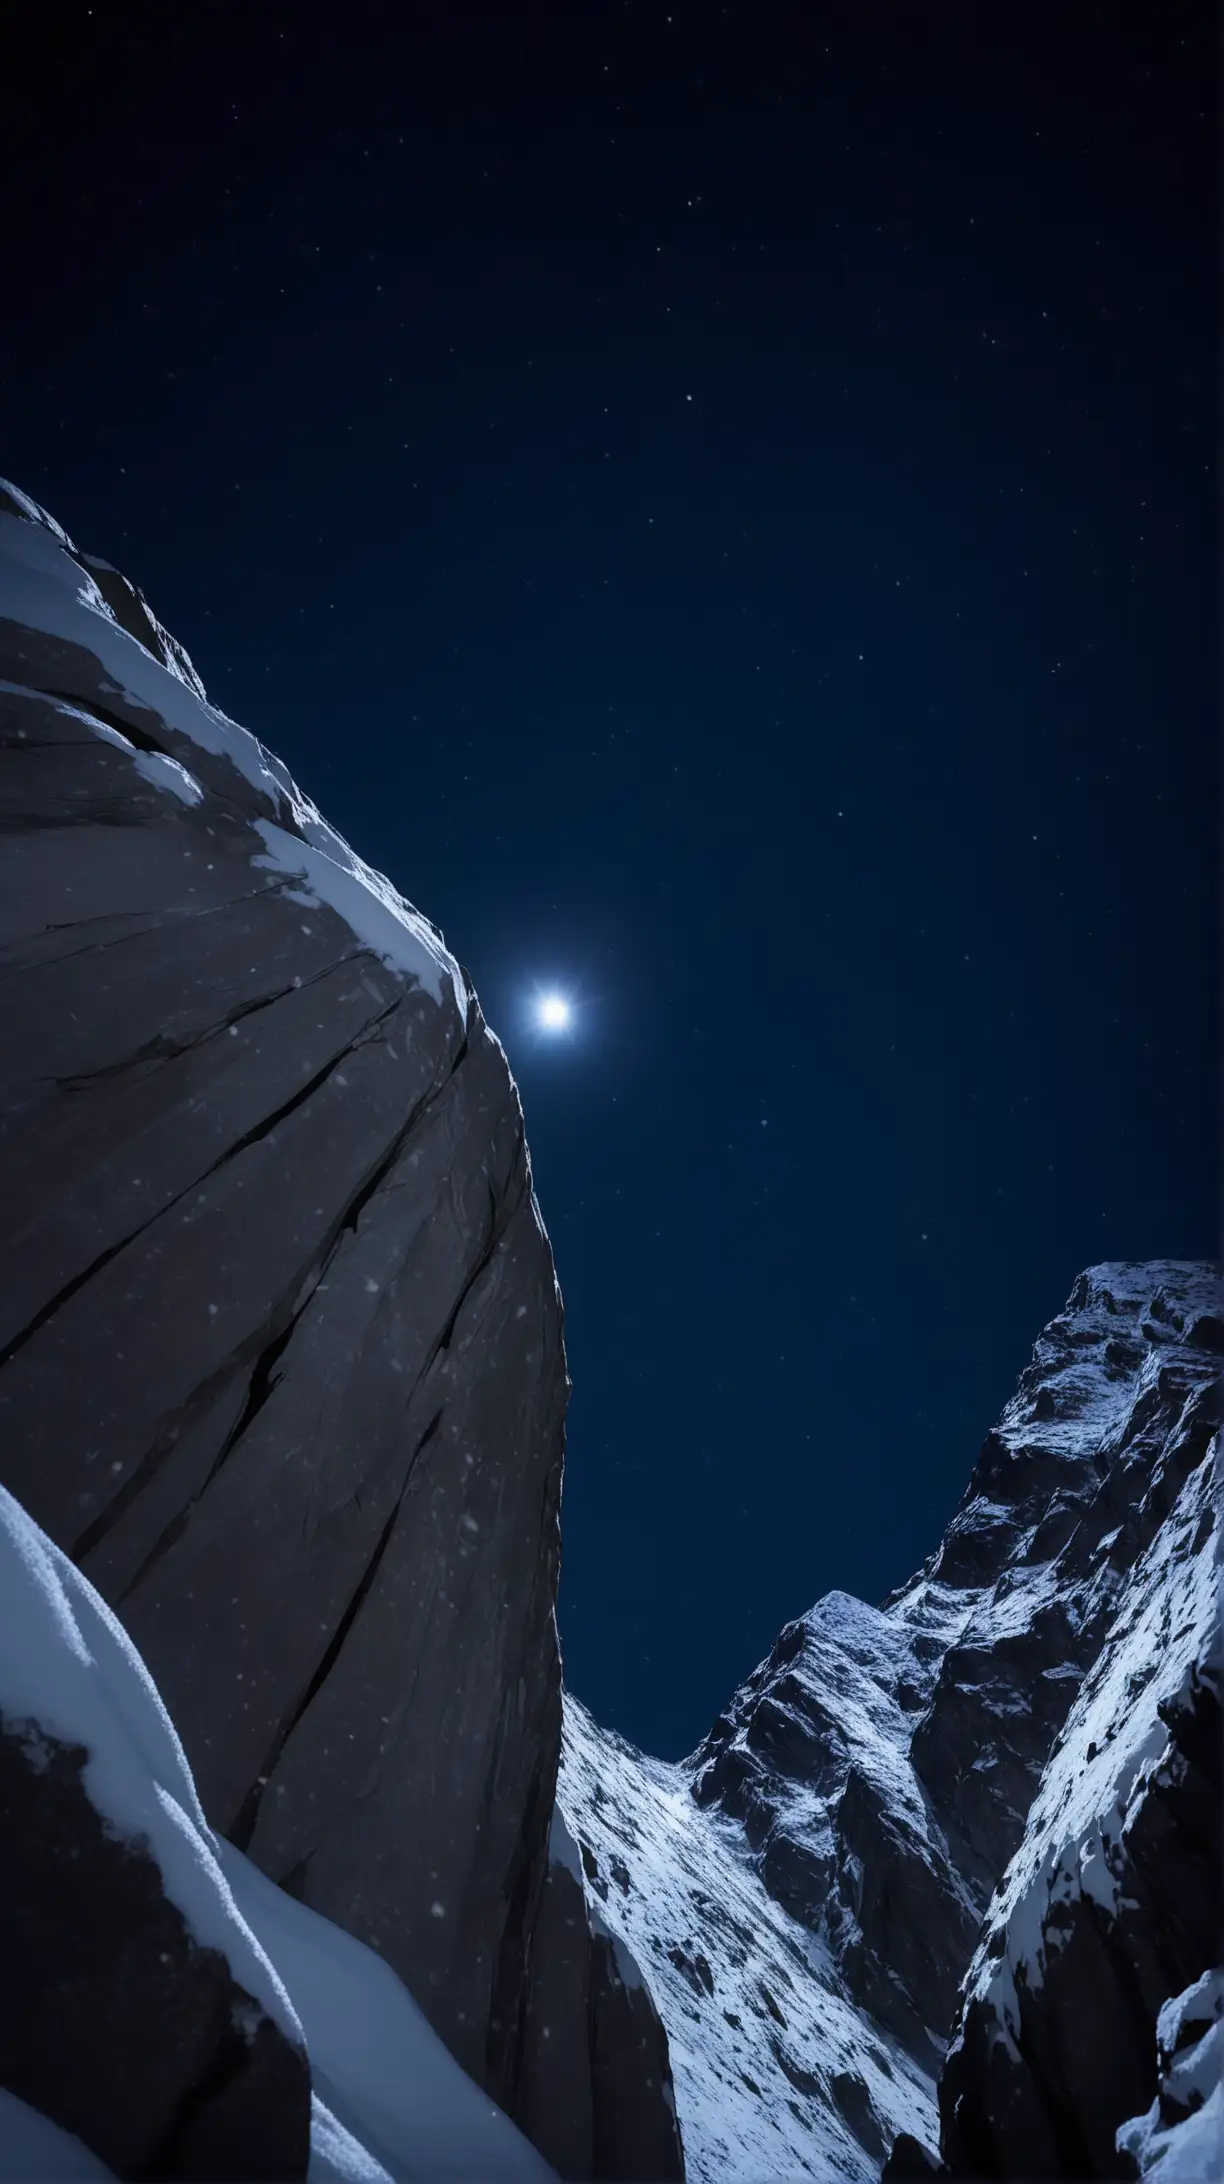 Snowy Rock Face Night Sky View with Central Peak